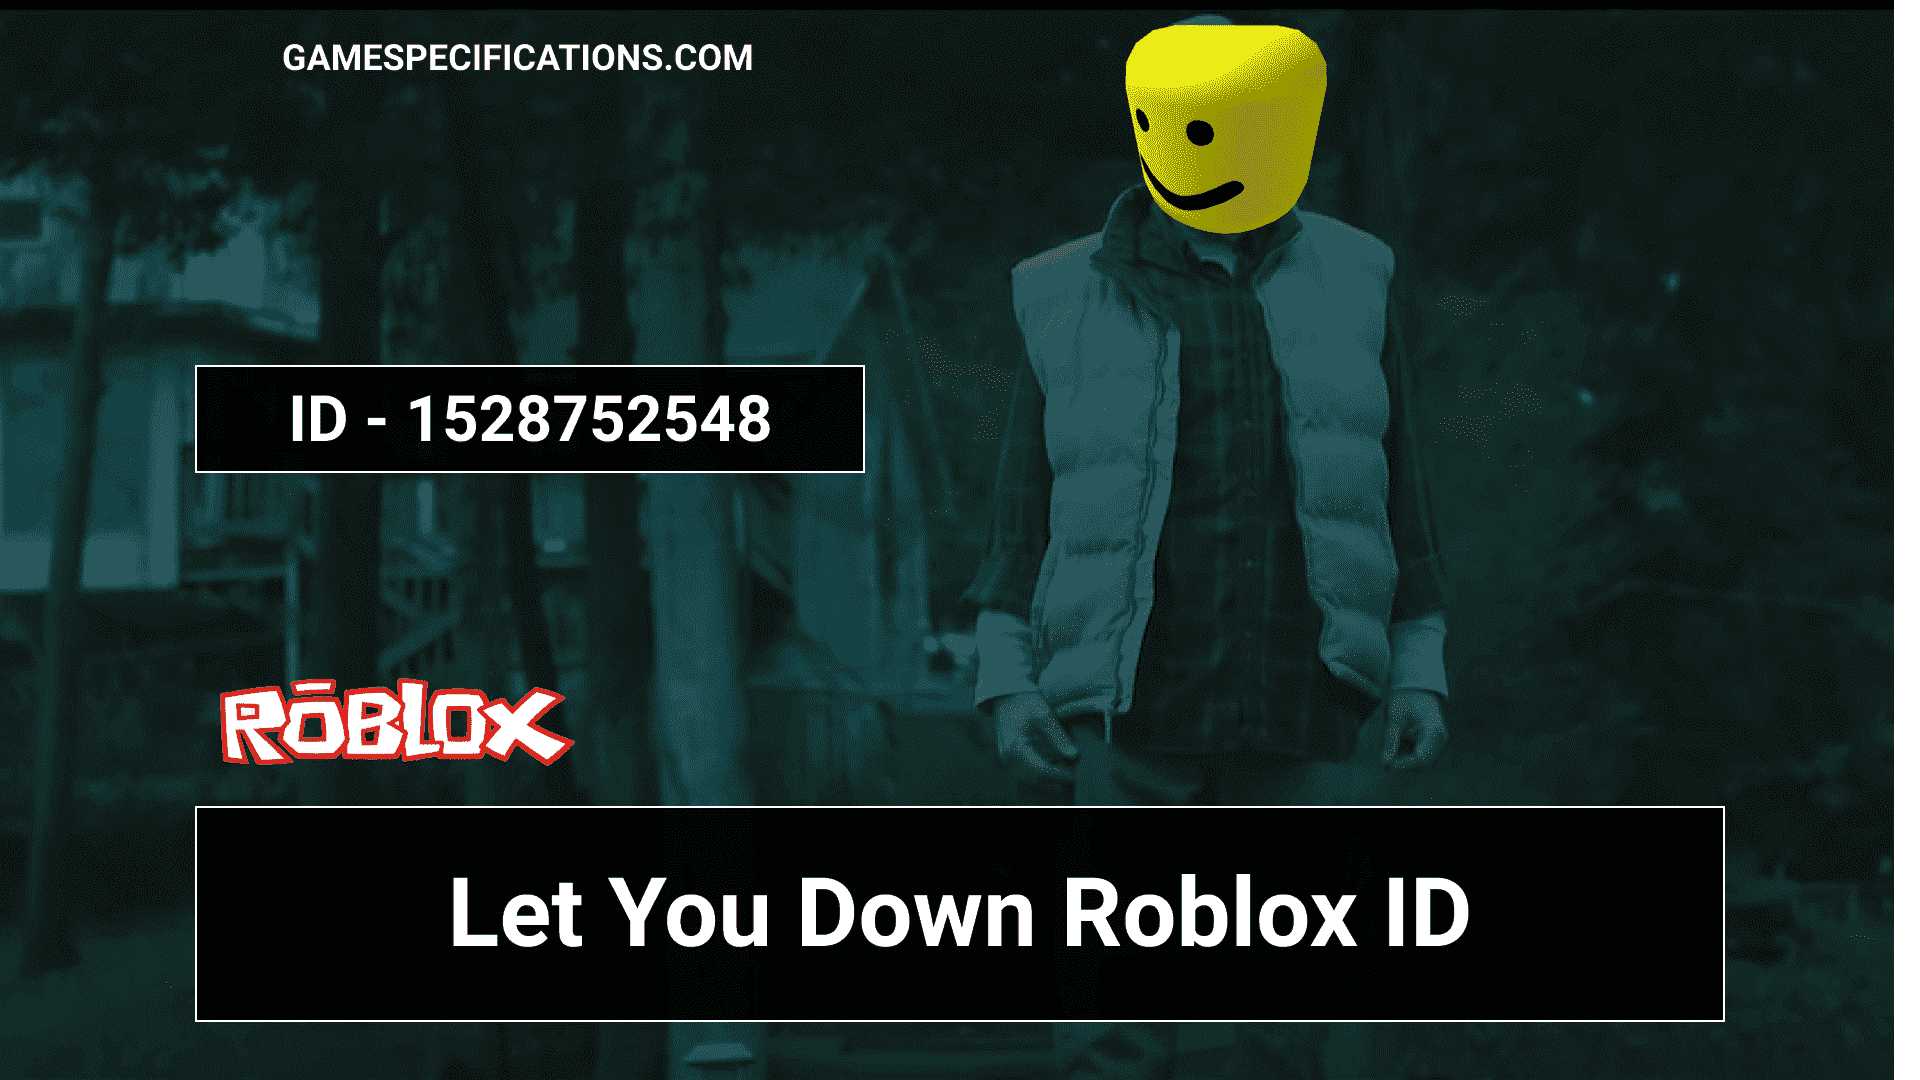 Let You Down Roblox Id Codes To Play The Nf Music 2021 Game Specifications - time nf roblox id